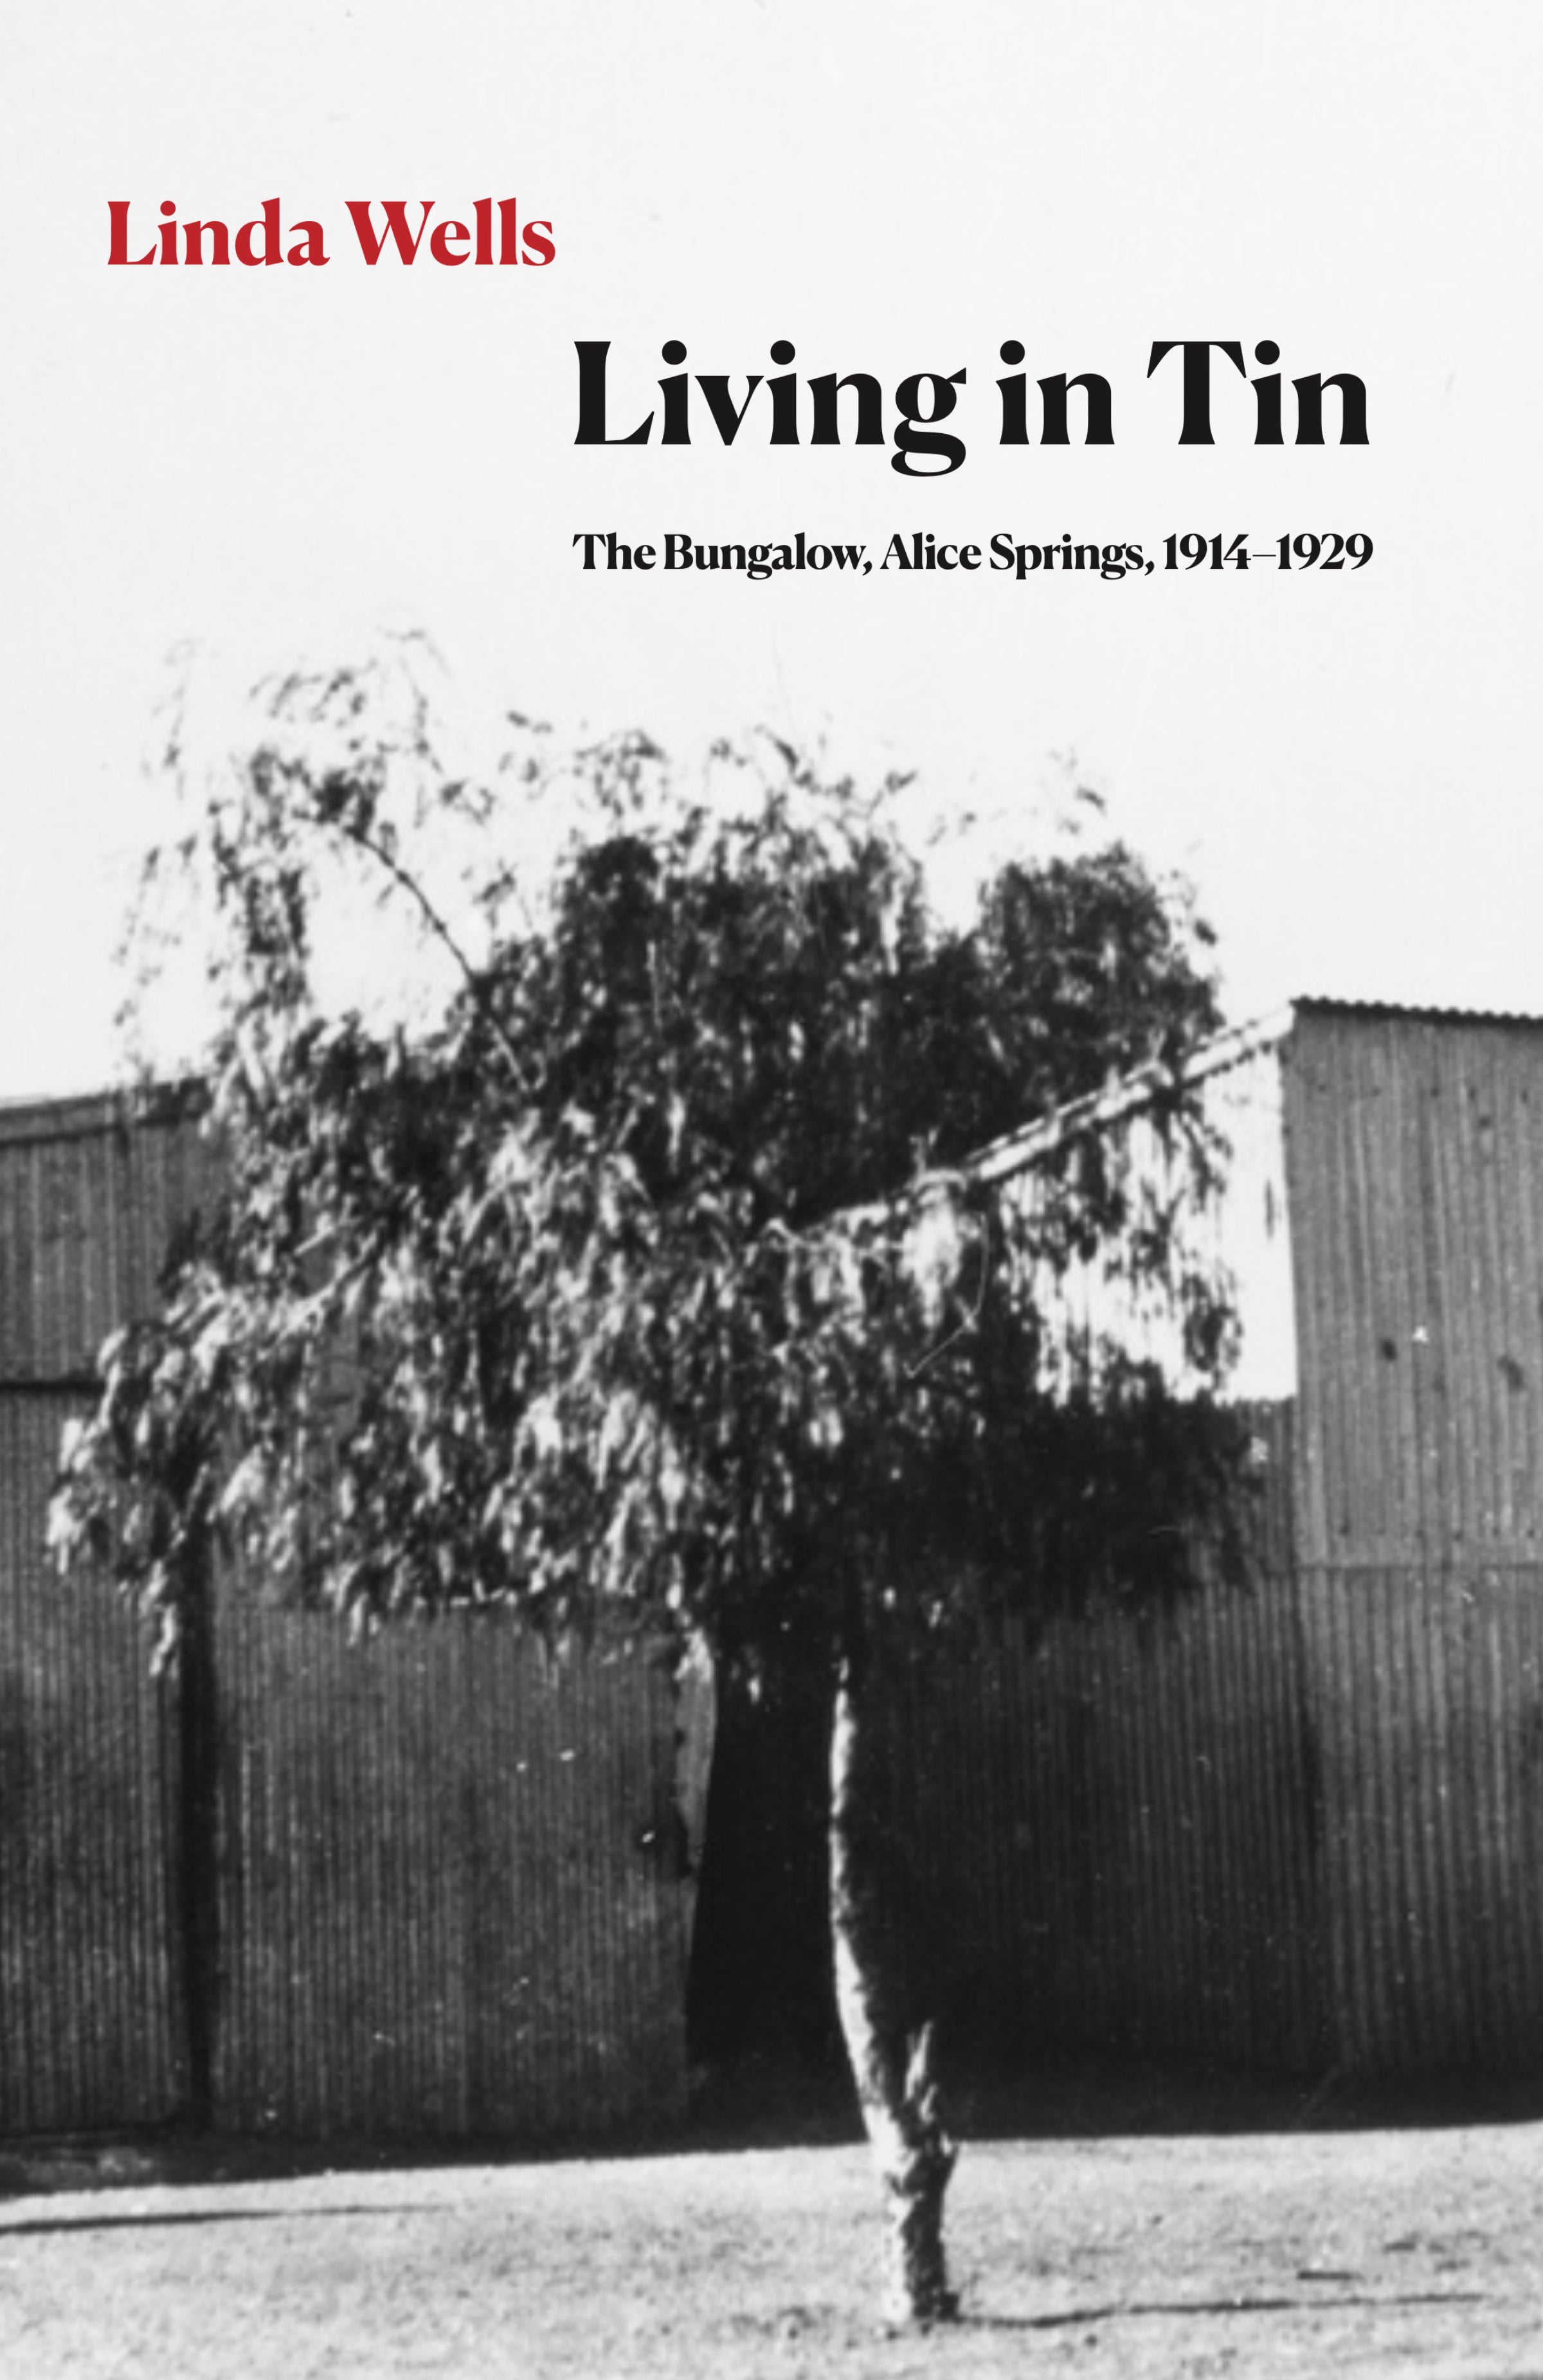 Living in Tin by Linda Wells